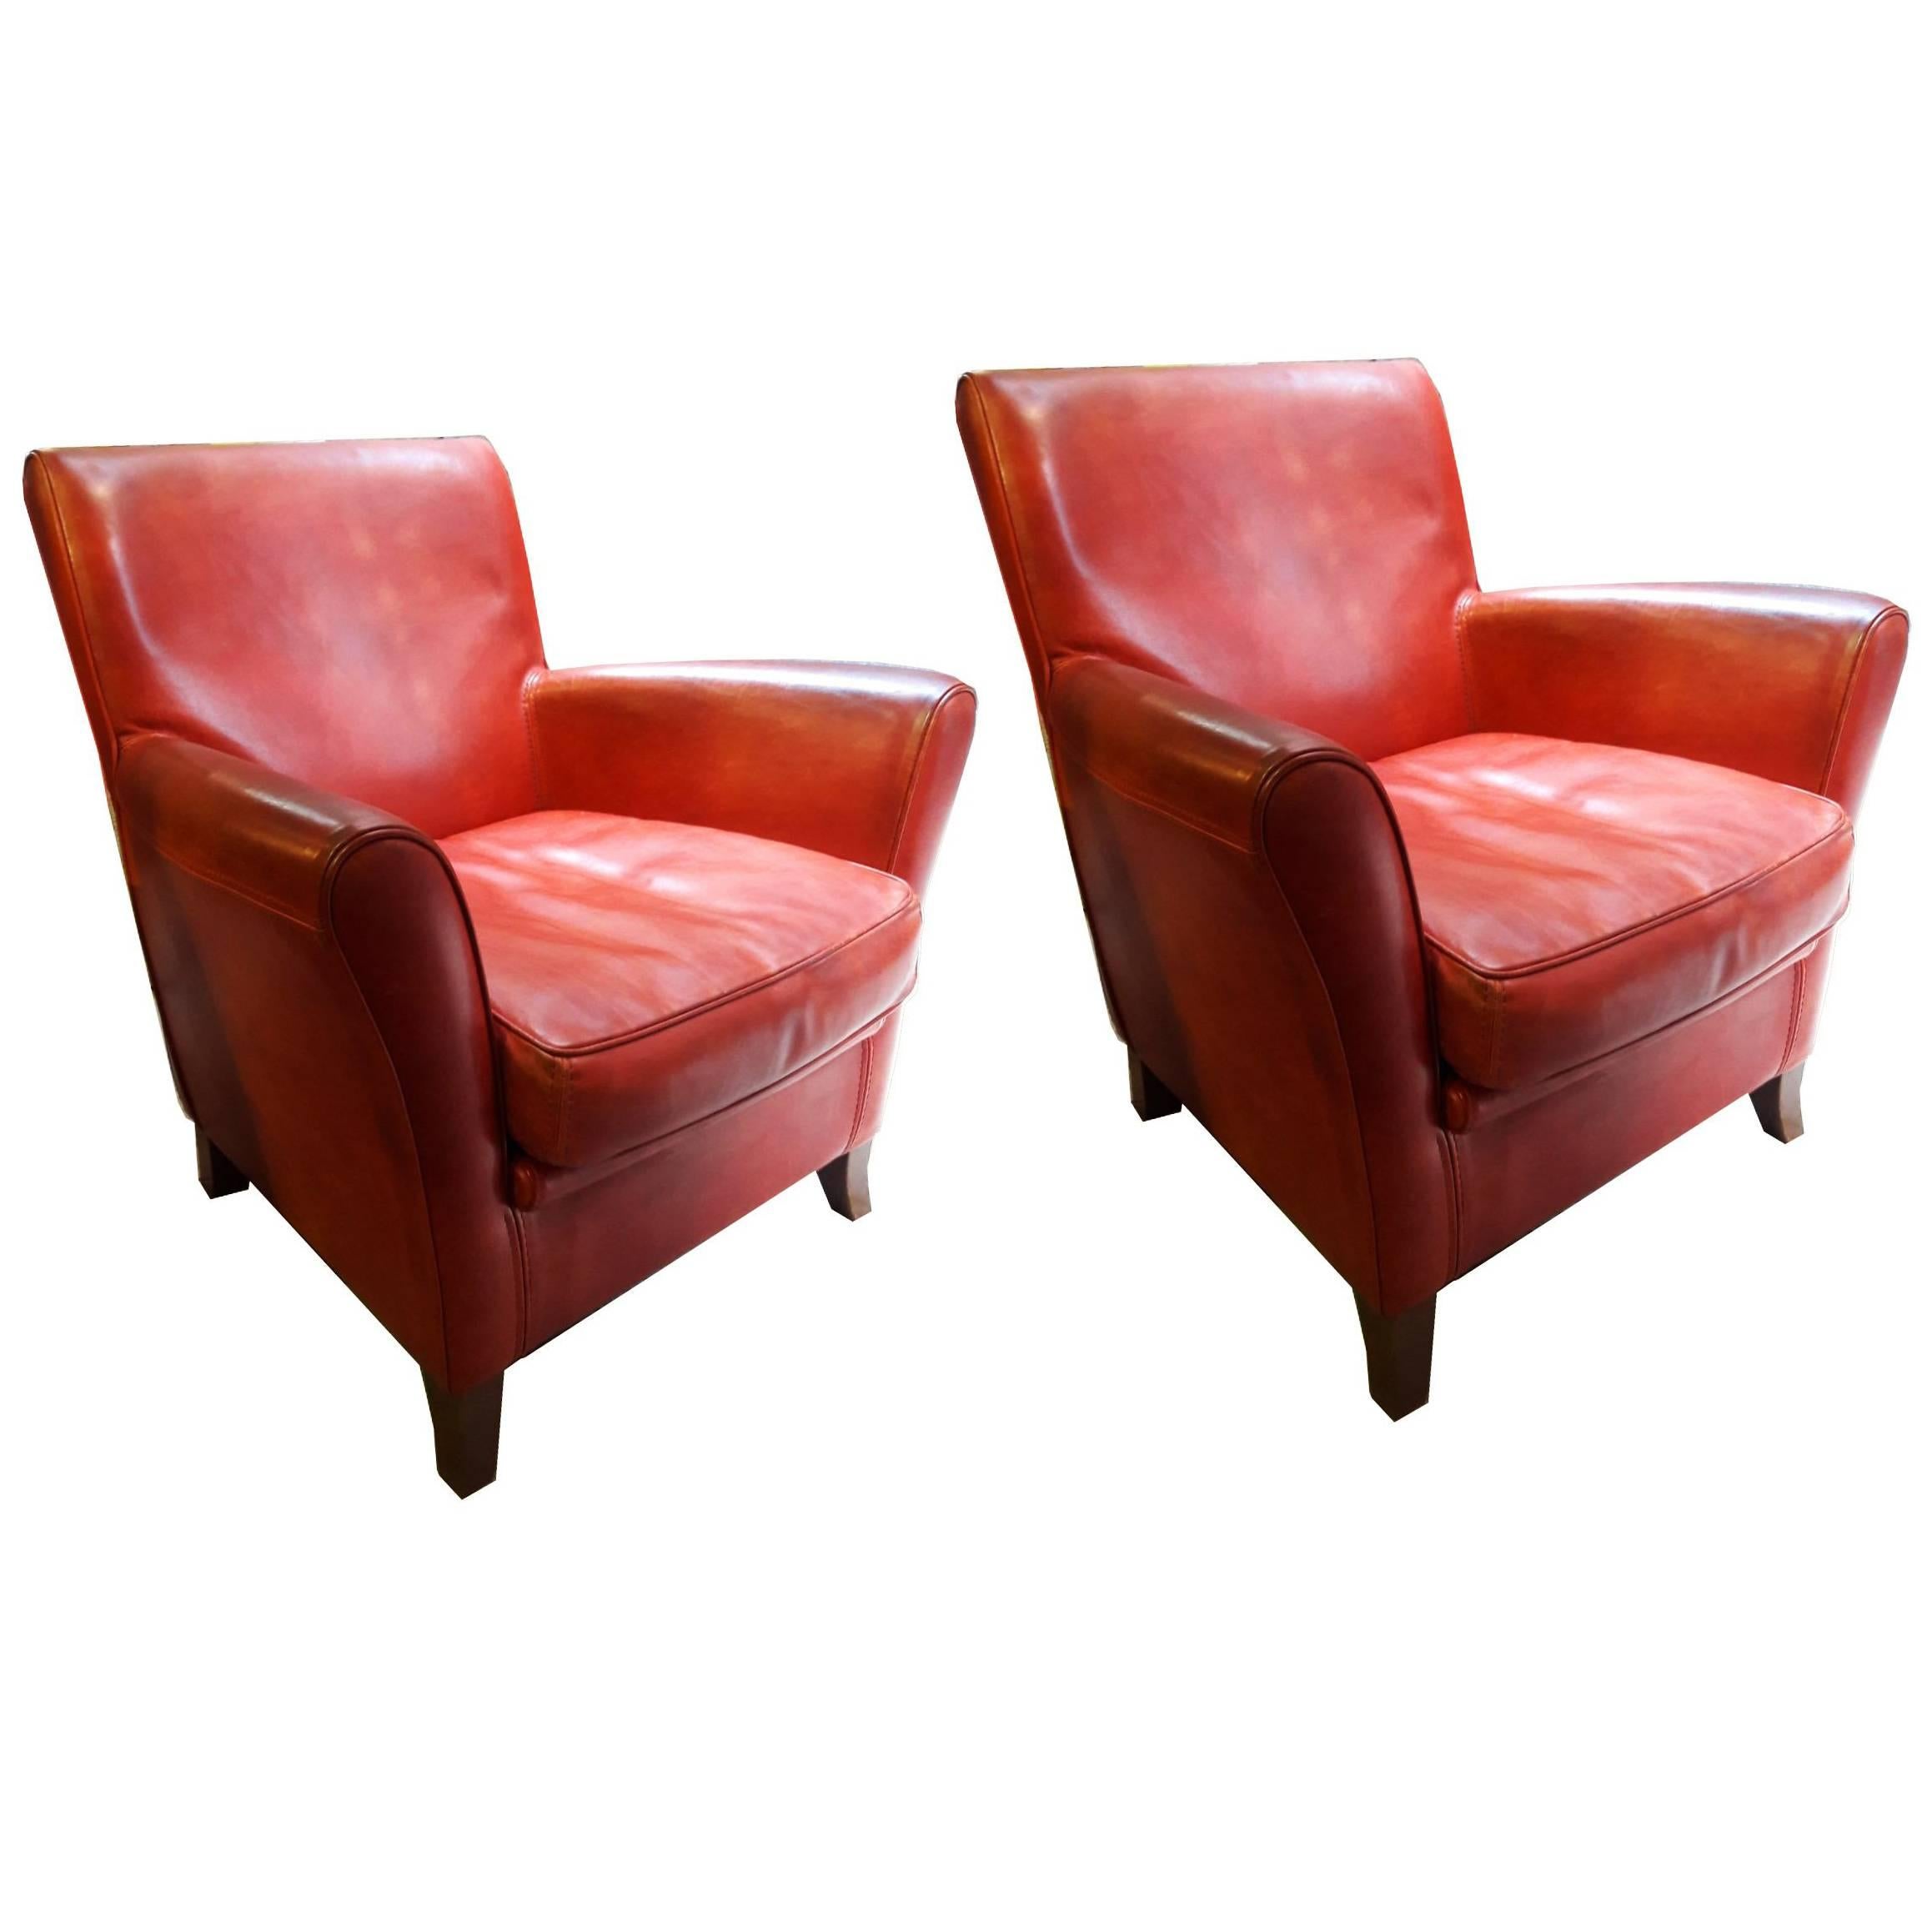 20th Century Red Vintage Leather Original Baxter Armchairs